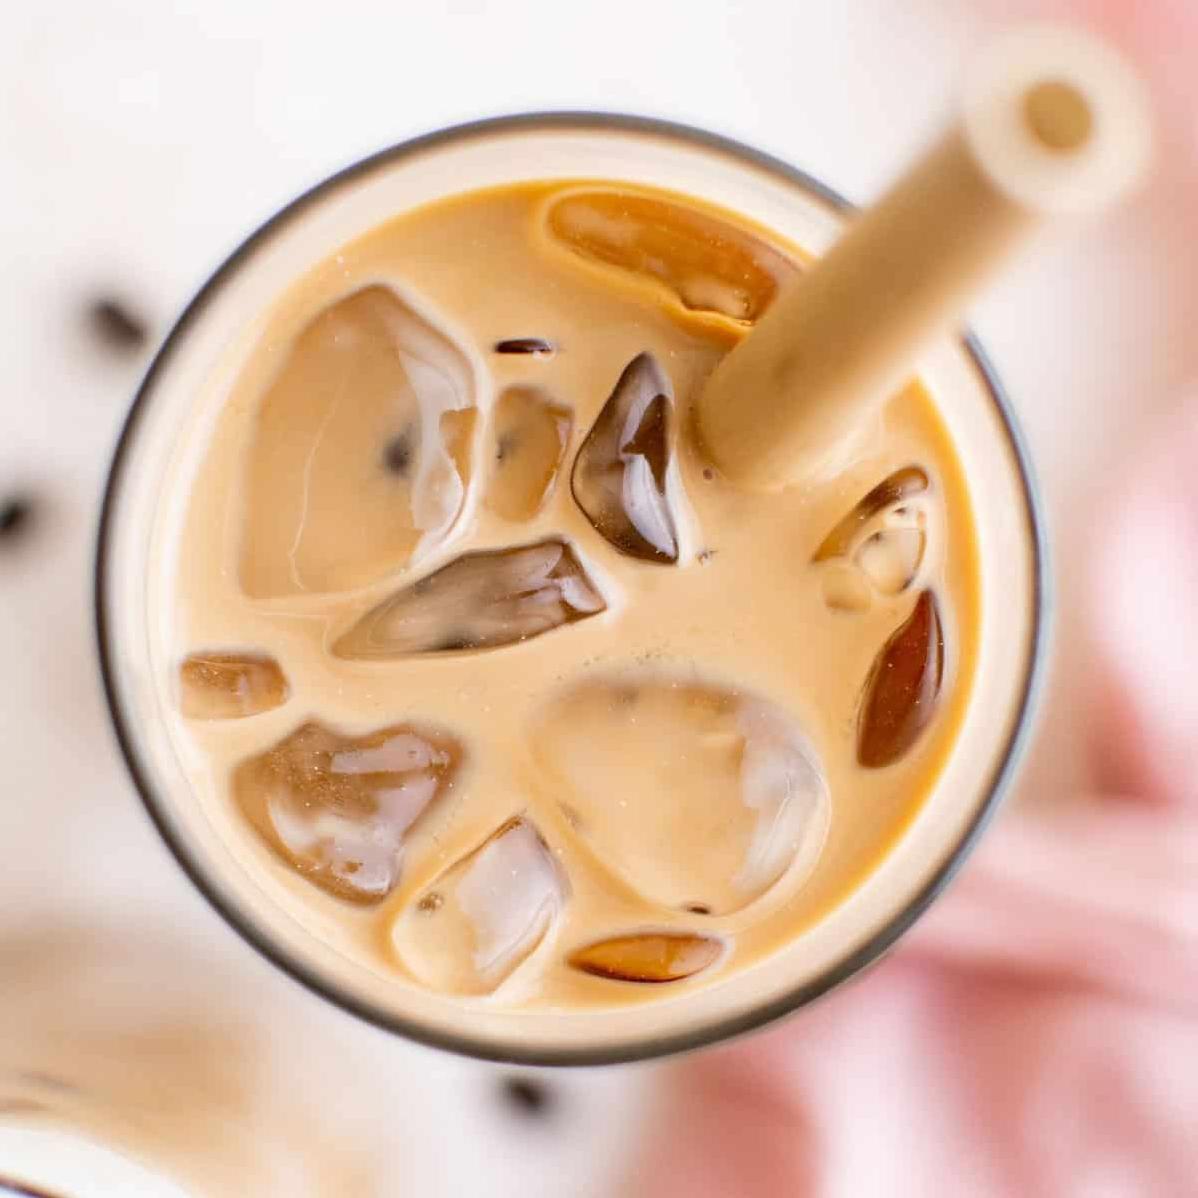  One sip of our caramel coffee and you'll be transported back to the cozy feeling of your favorite childhood candy.